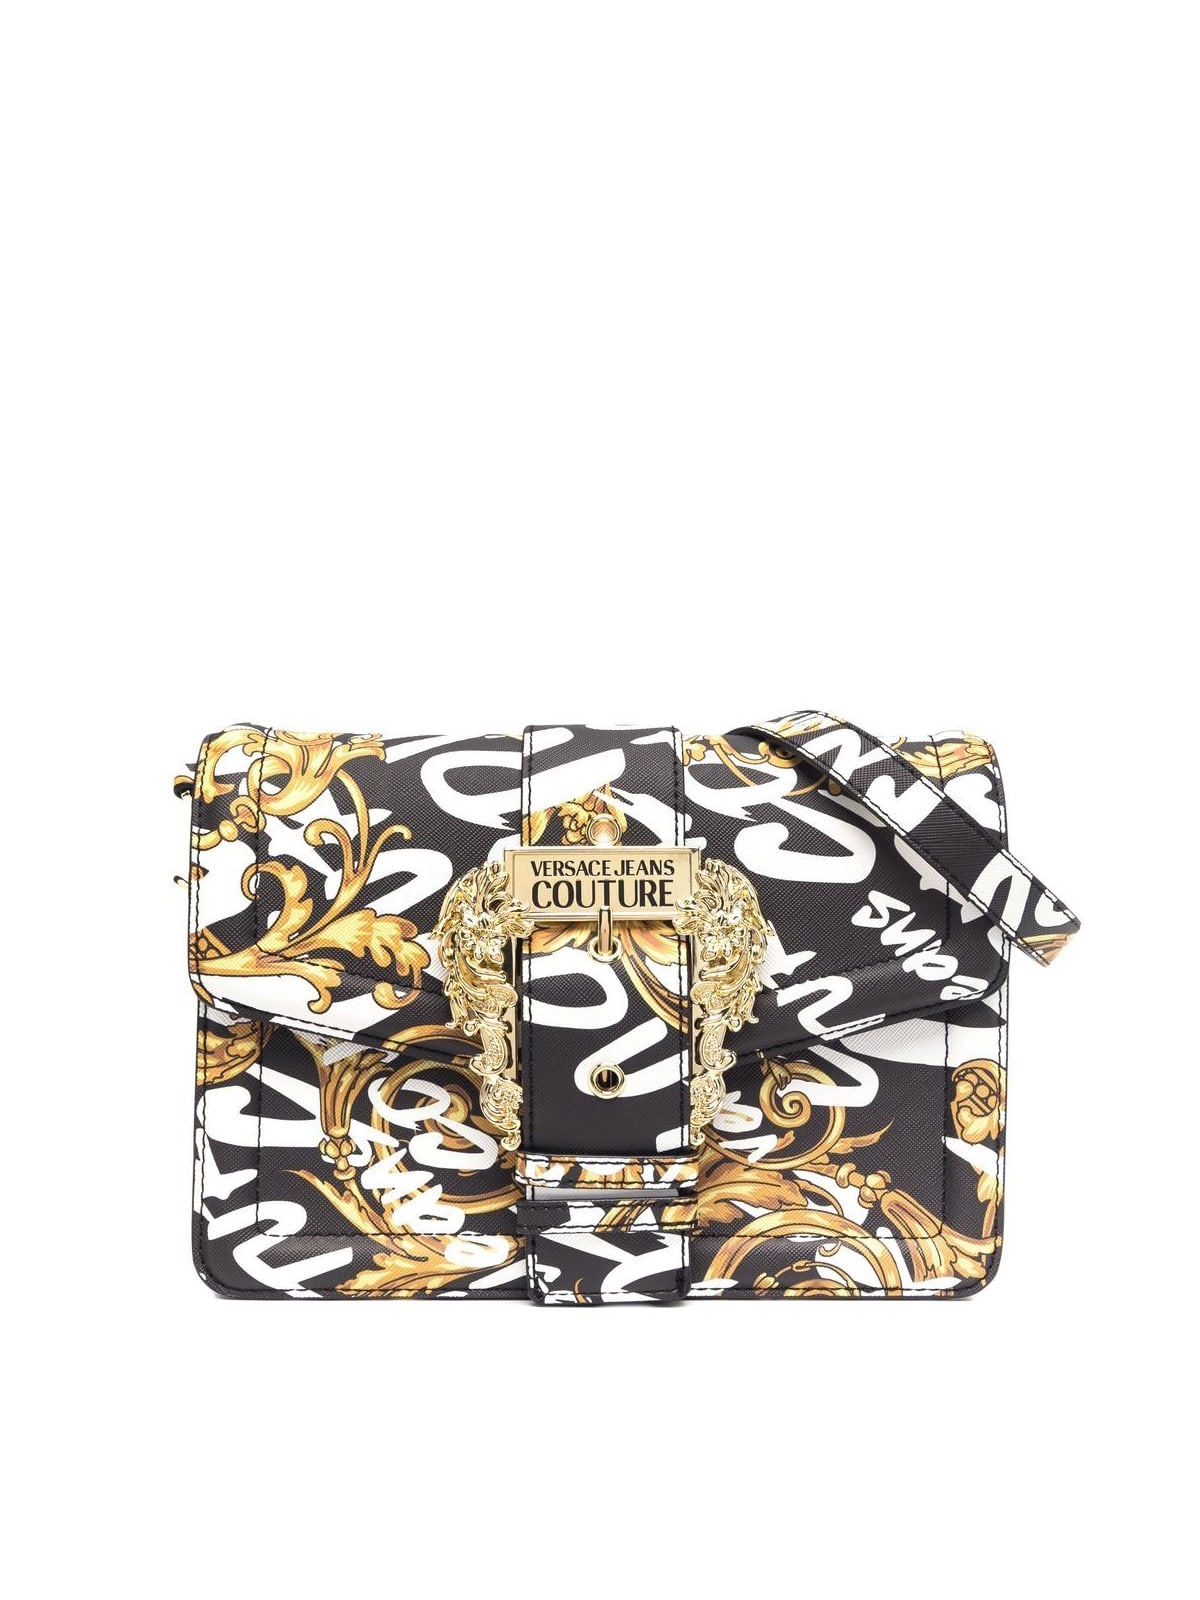 Versace Jeans Couture Range F Couture 01 Sketch 1 Couture Printed Crossbody Bag